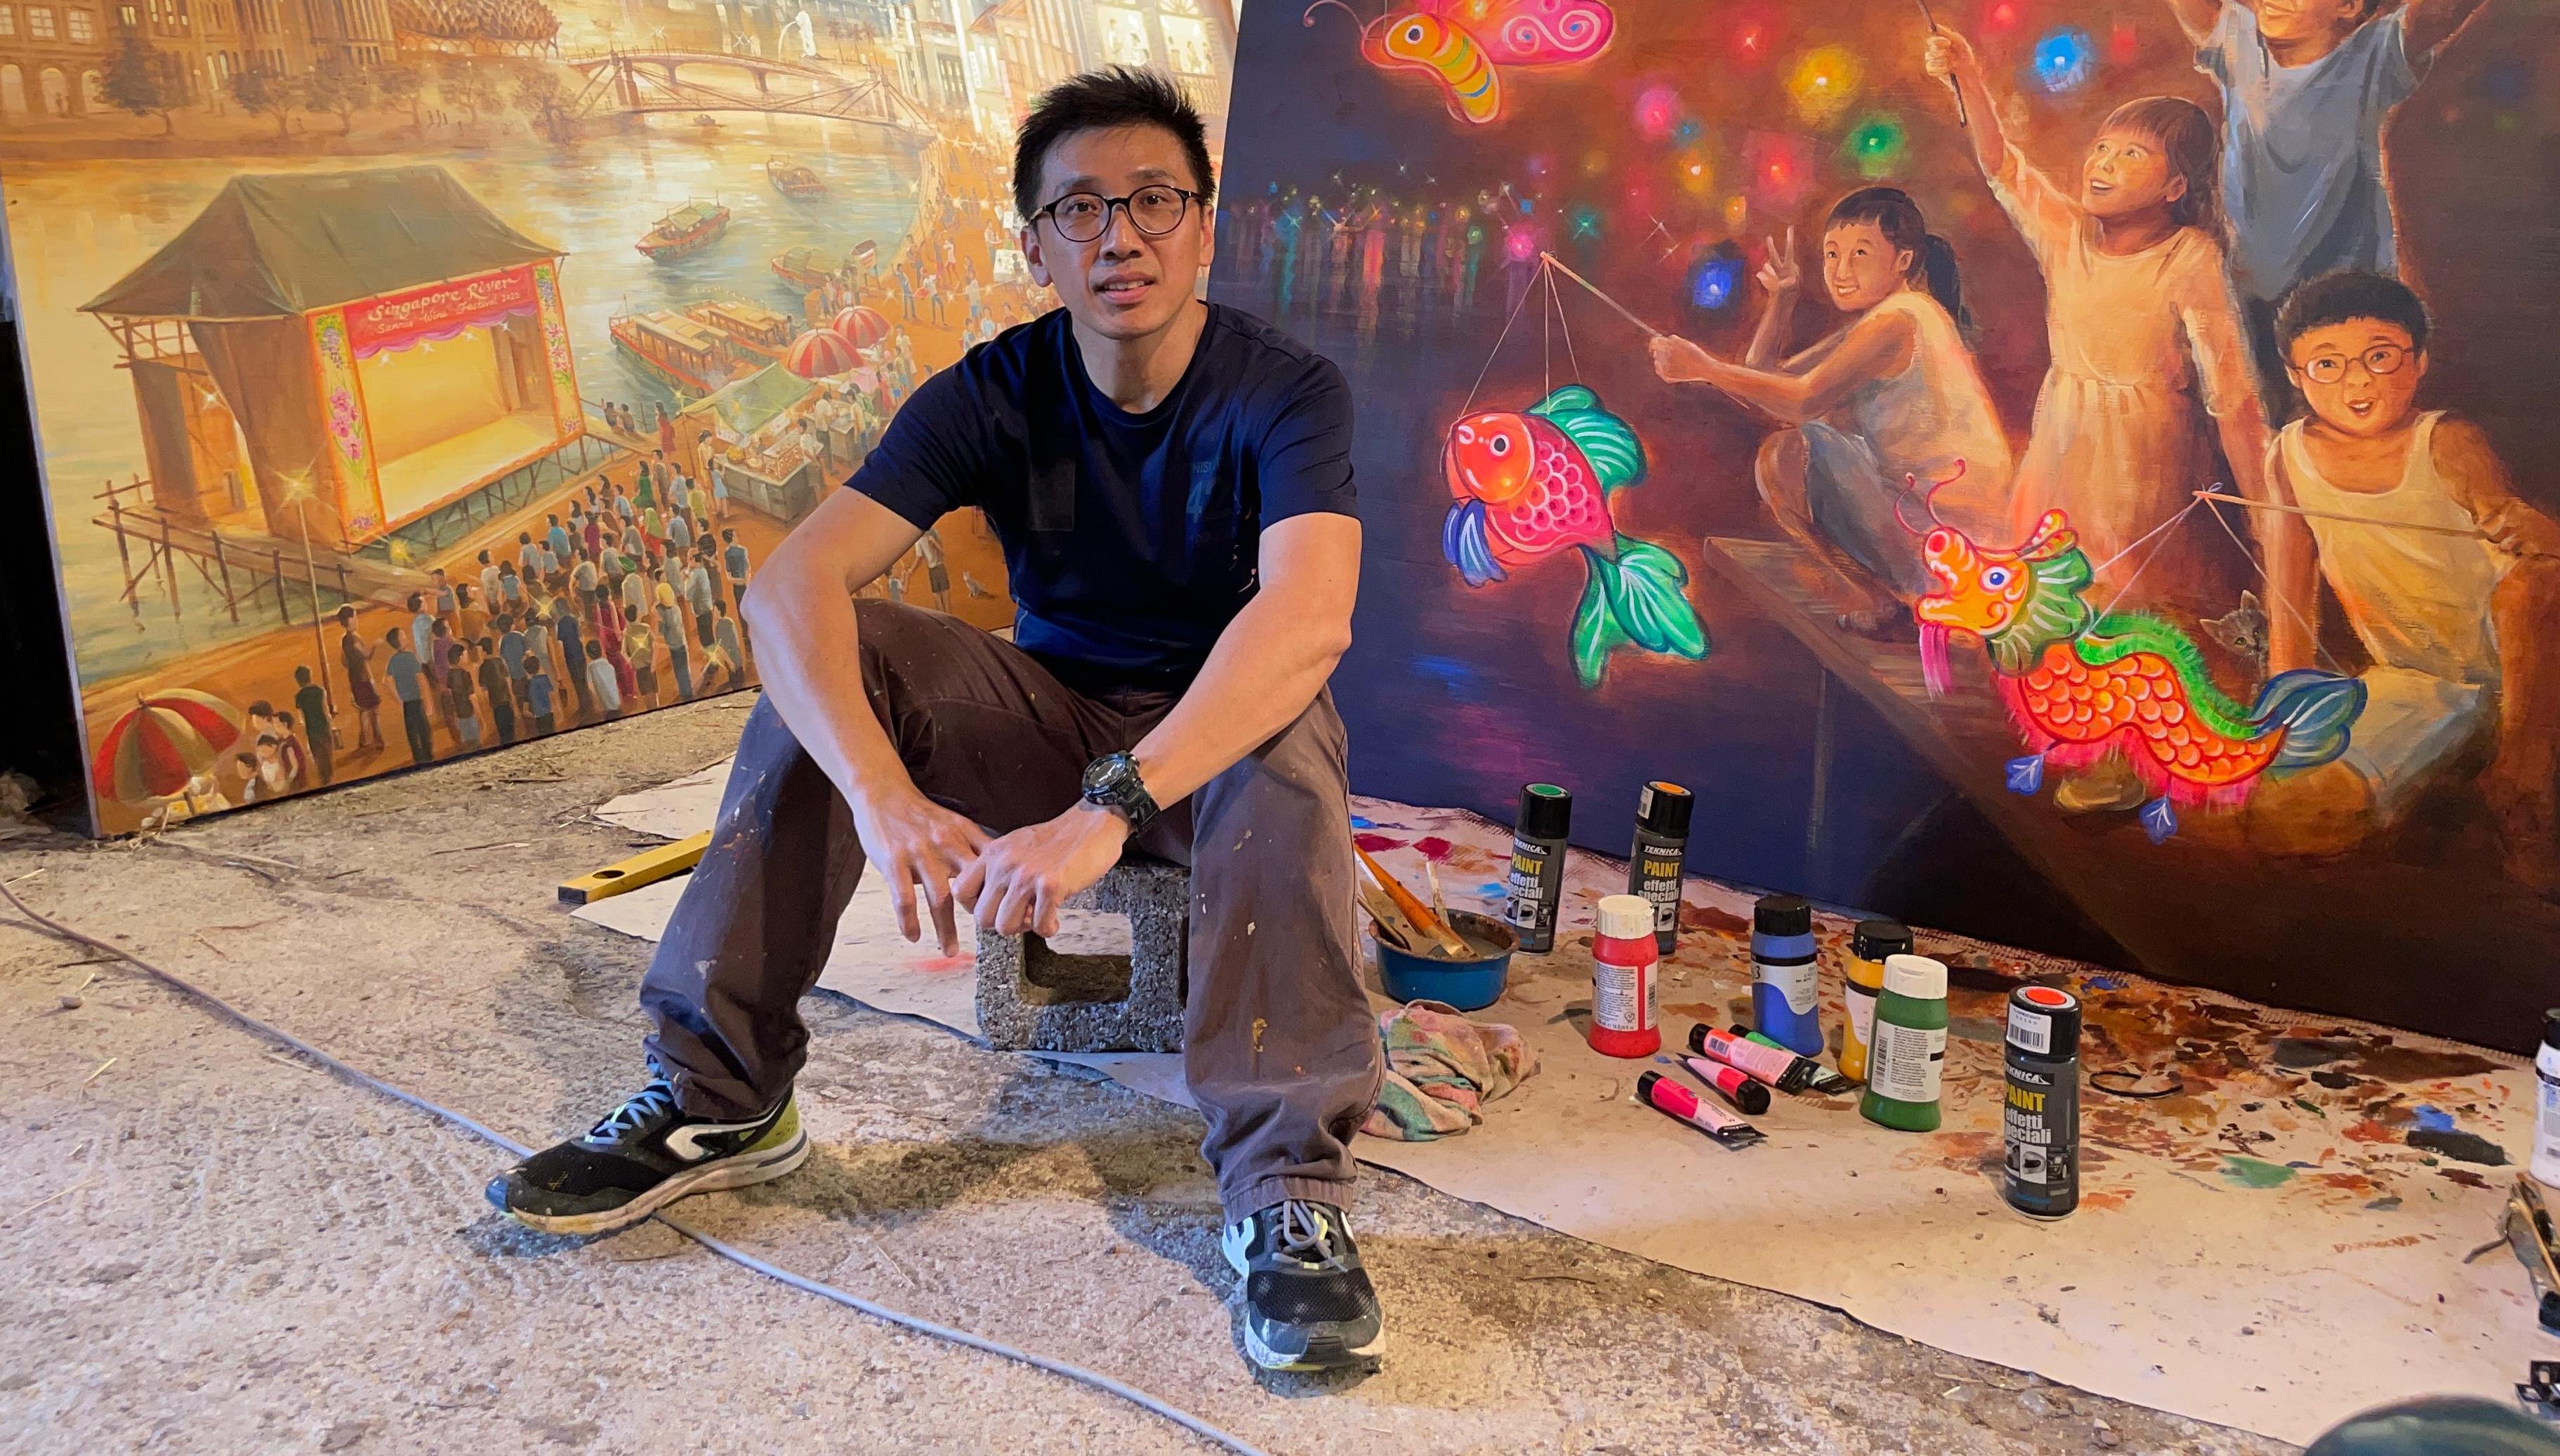 Fireside Chat With Artist Yip Yew Chong